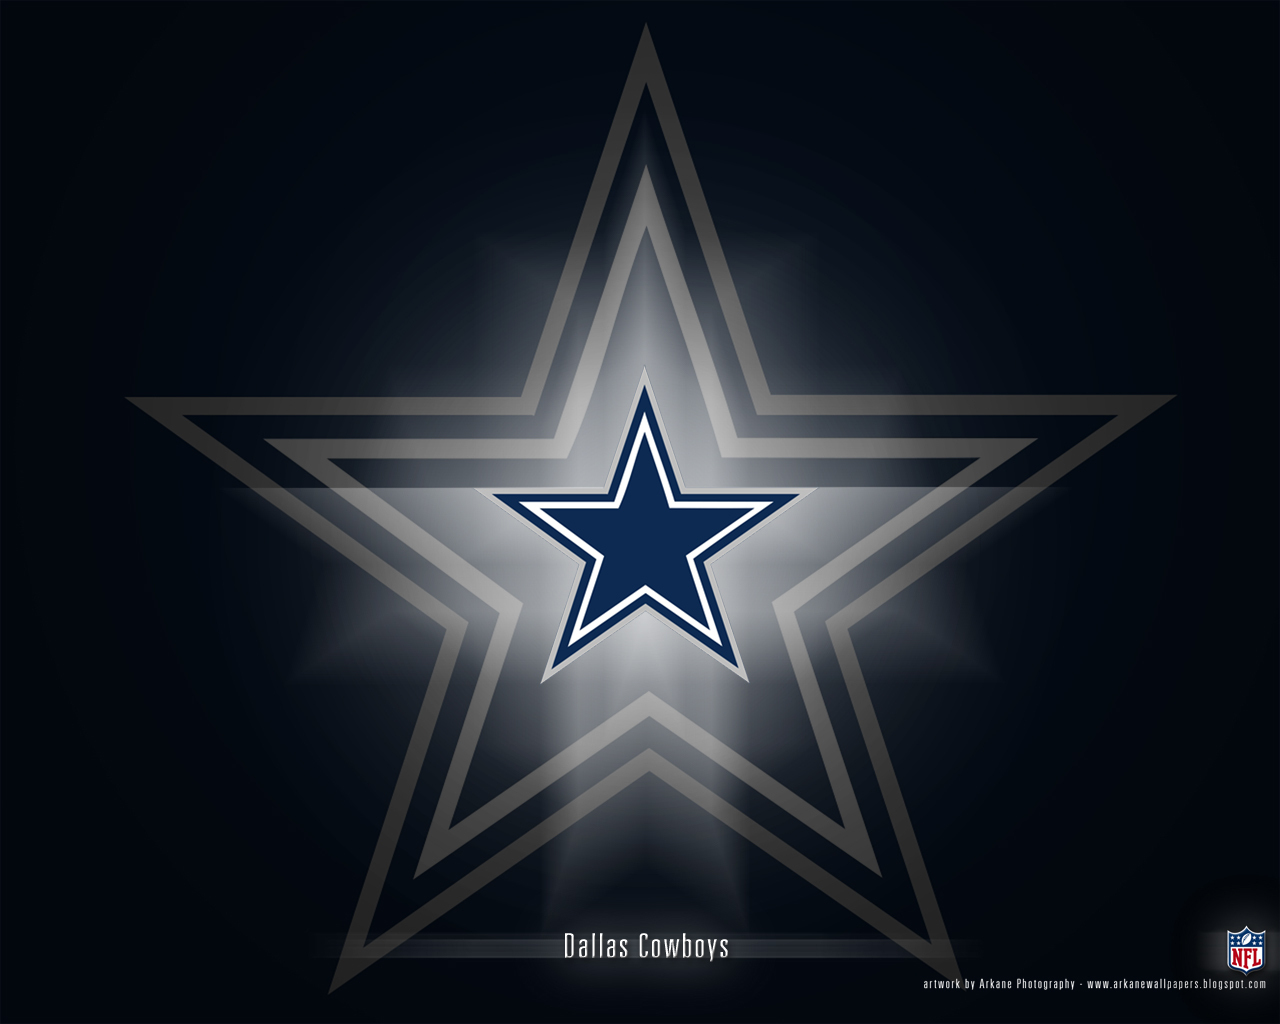 official site of the dallas cowboys